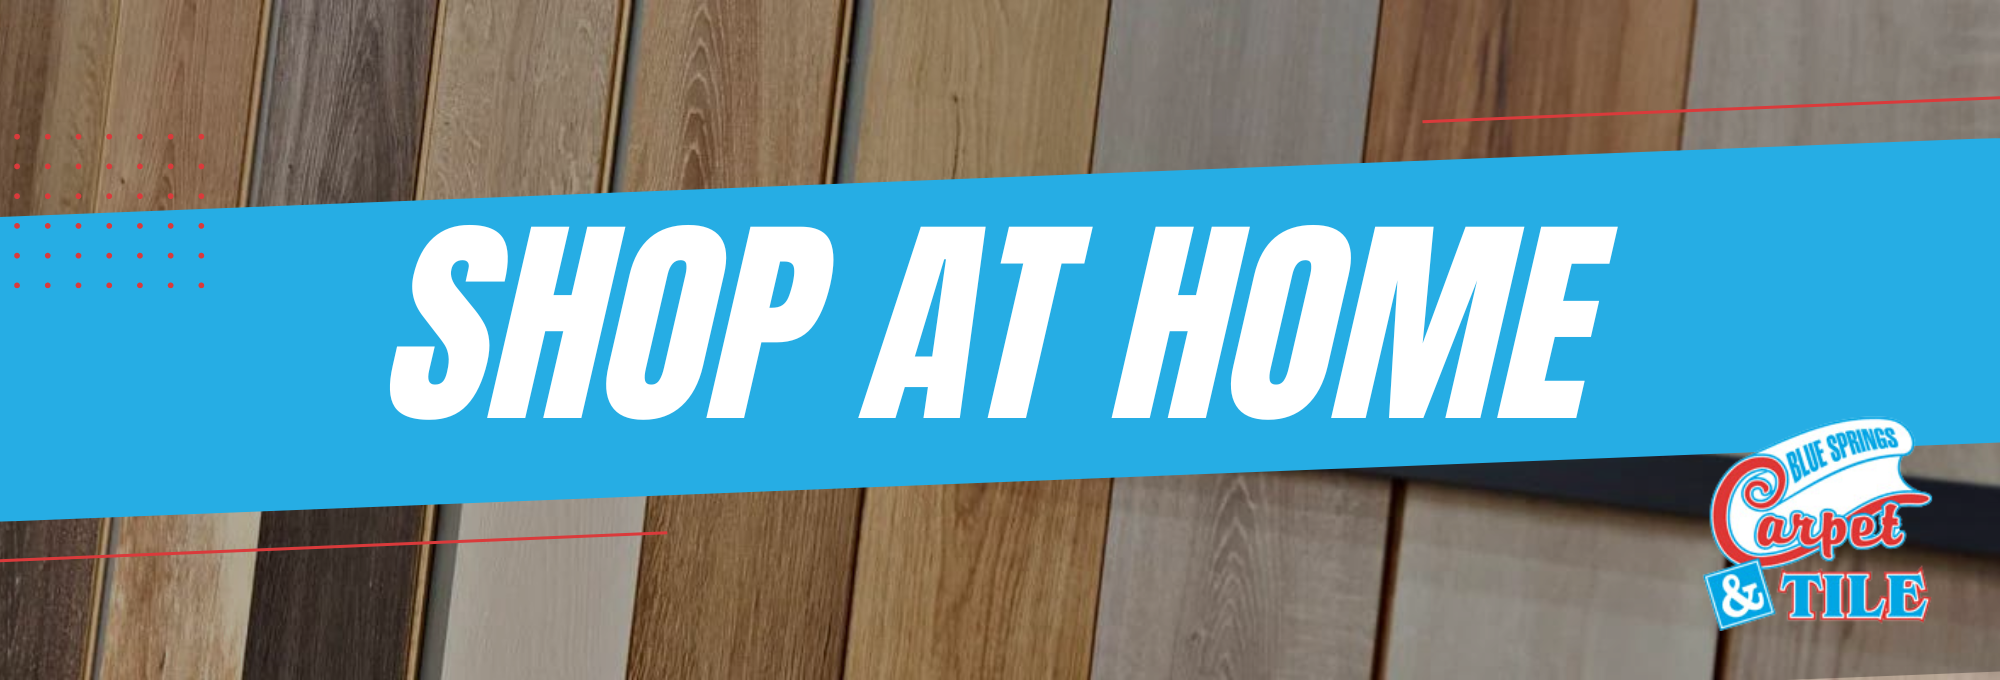 Shop at home for flooring in Blue Springs, MO